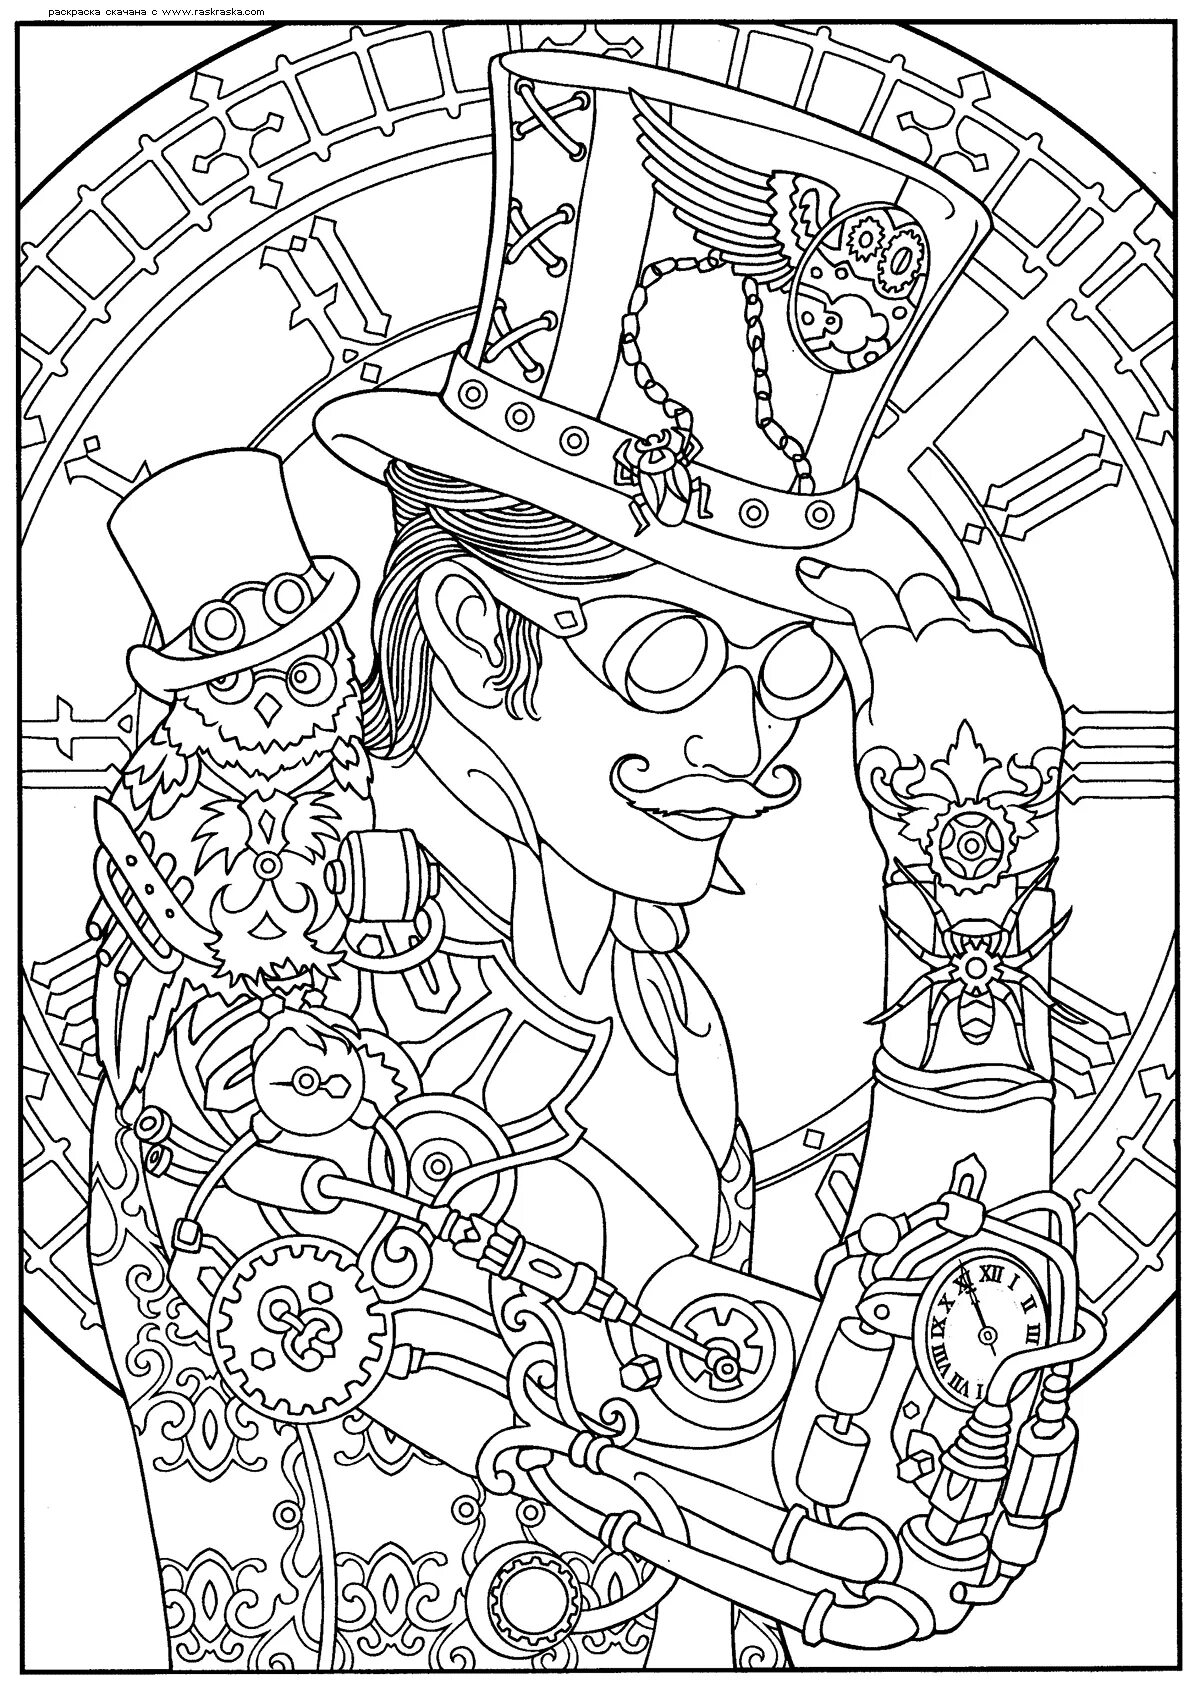 Bold steampunk coloring book